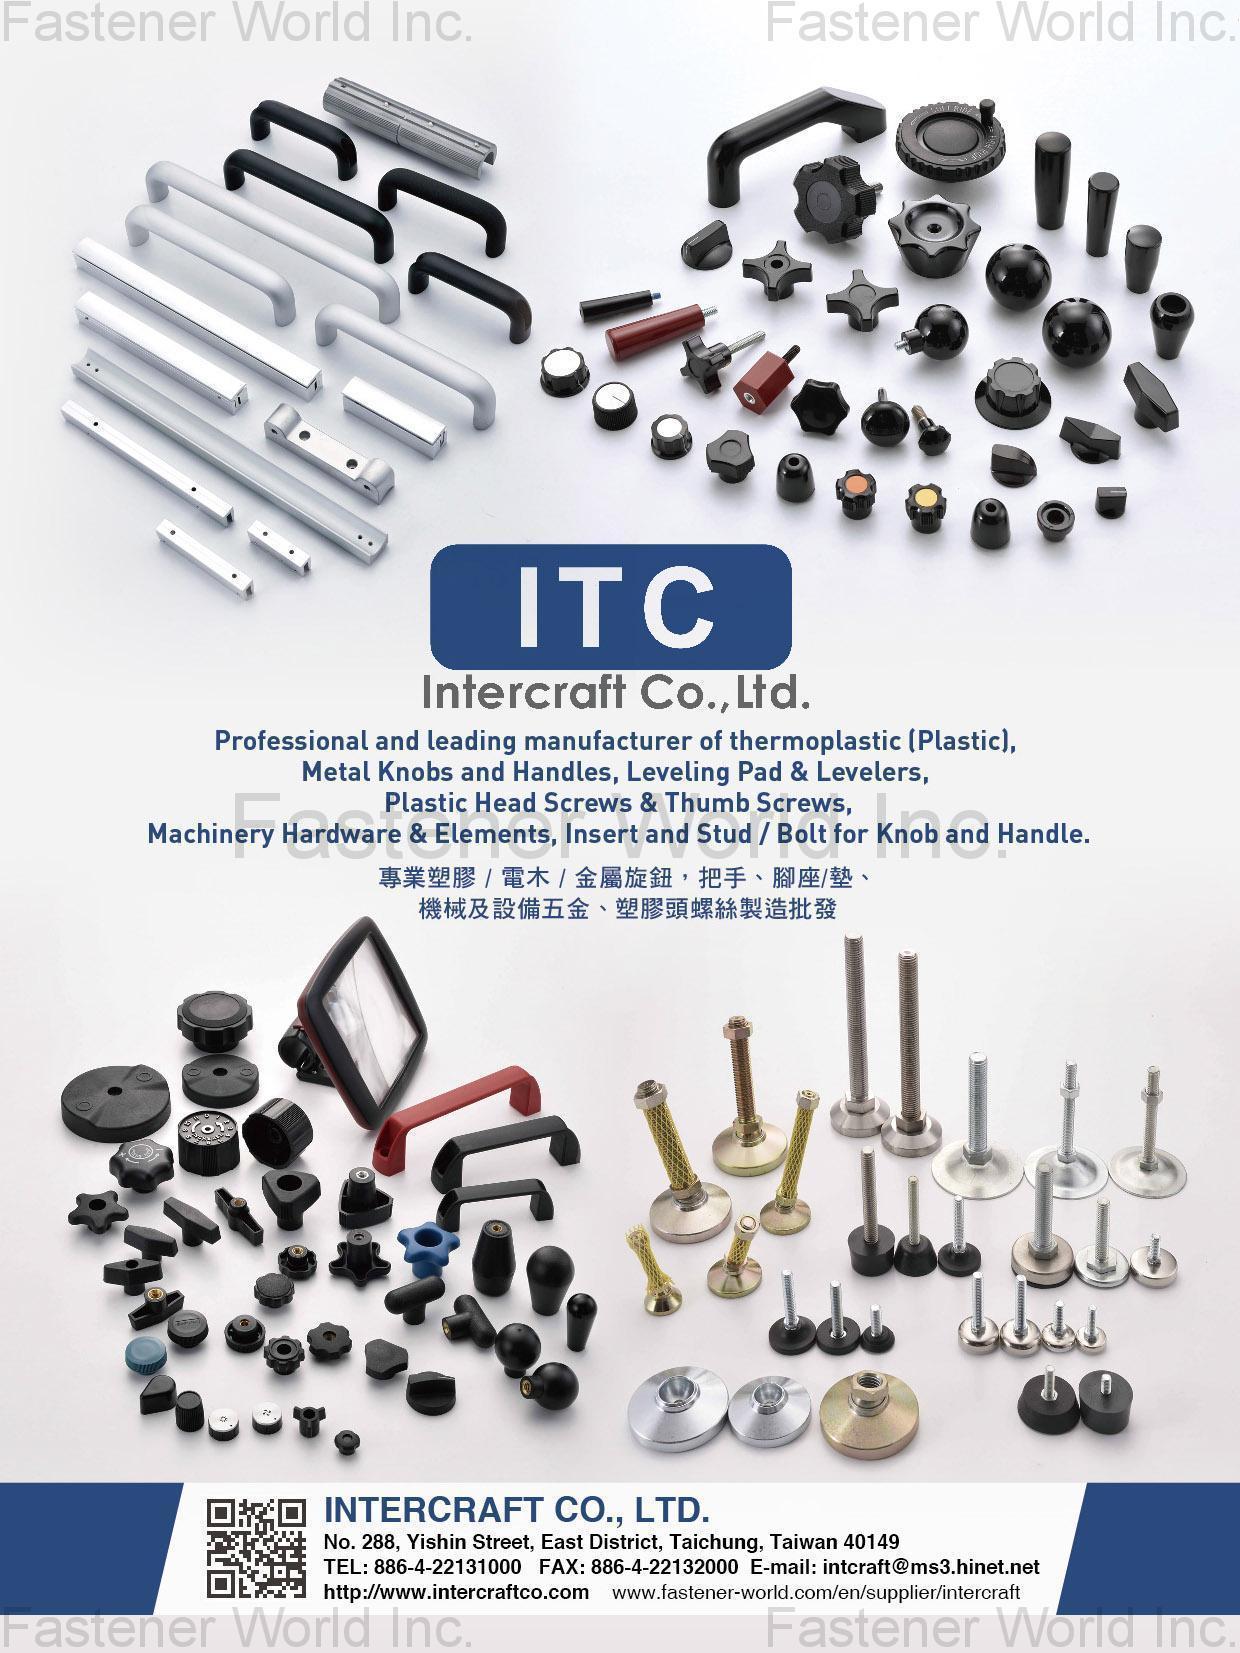 INTERCRAFT CO., LTD. , Thermoplastic (Plastic), Metal Knobs and Handles, Leveling Pad & Levelers, Plastic Head Screws & Thumb Screws, Machinery Hardware & Elements, Insert and Stud / Bolt for Knob and Handel